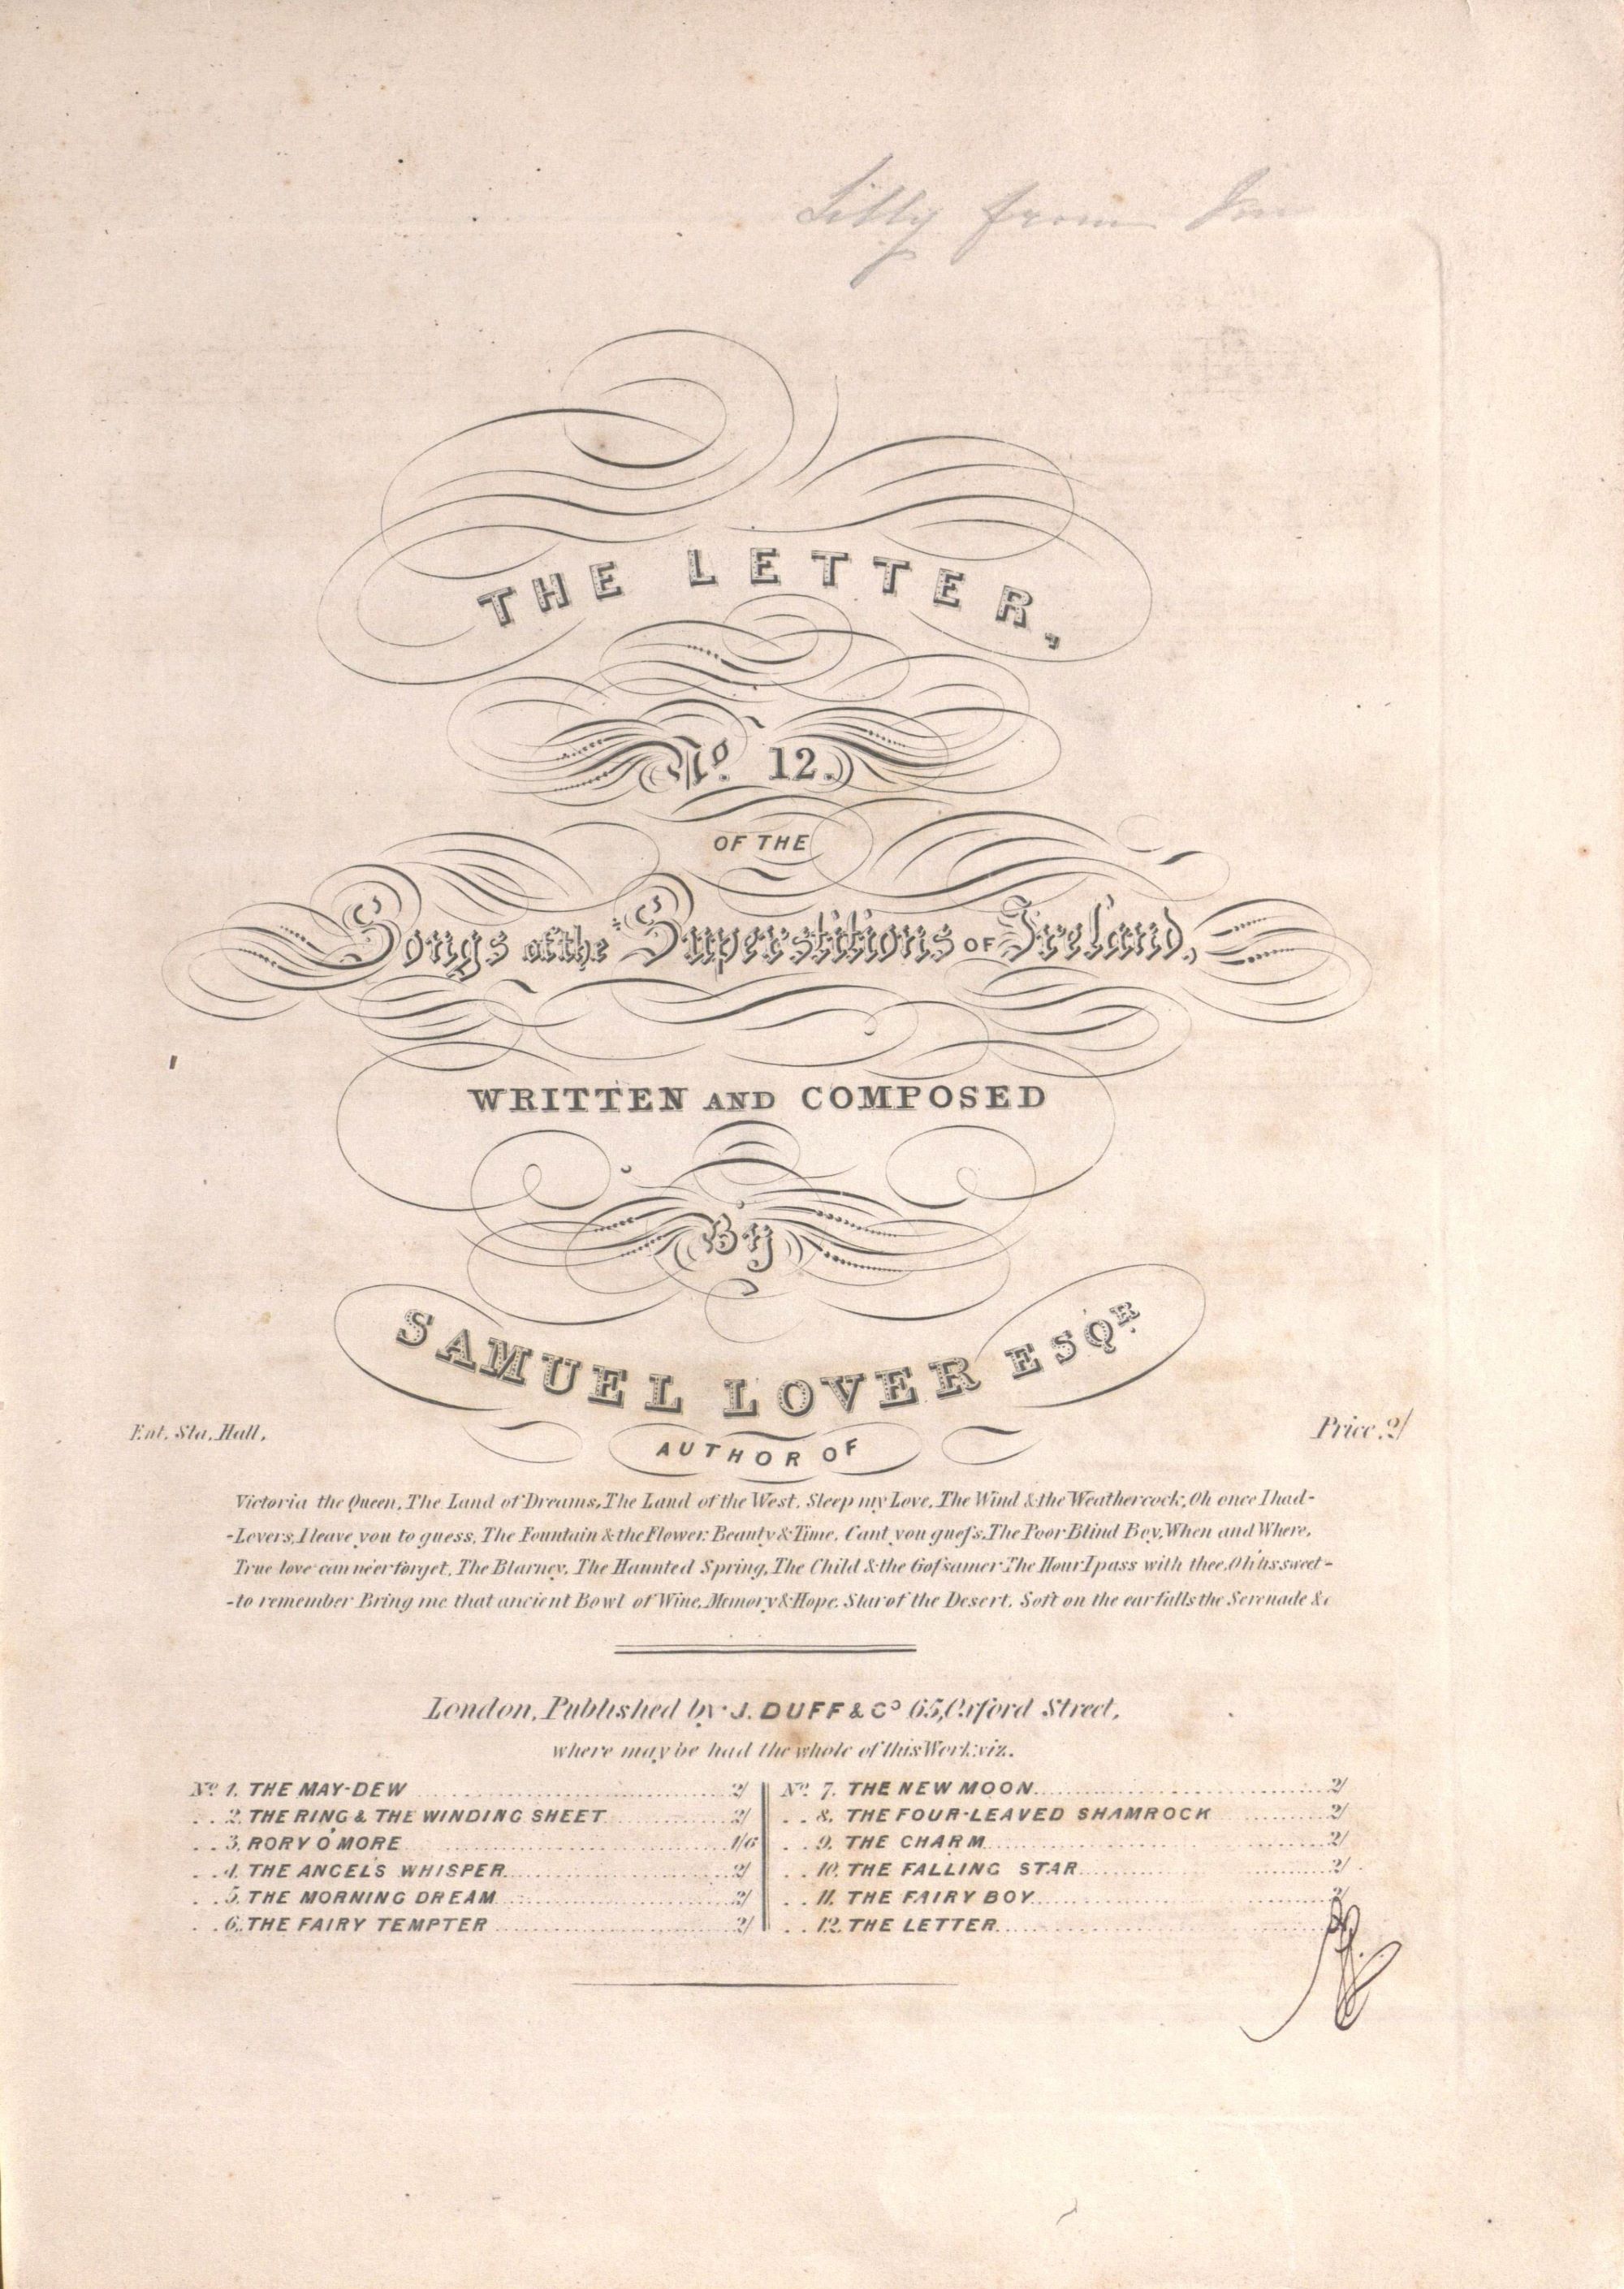 Cover page of sheet music The Letter